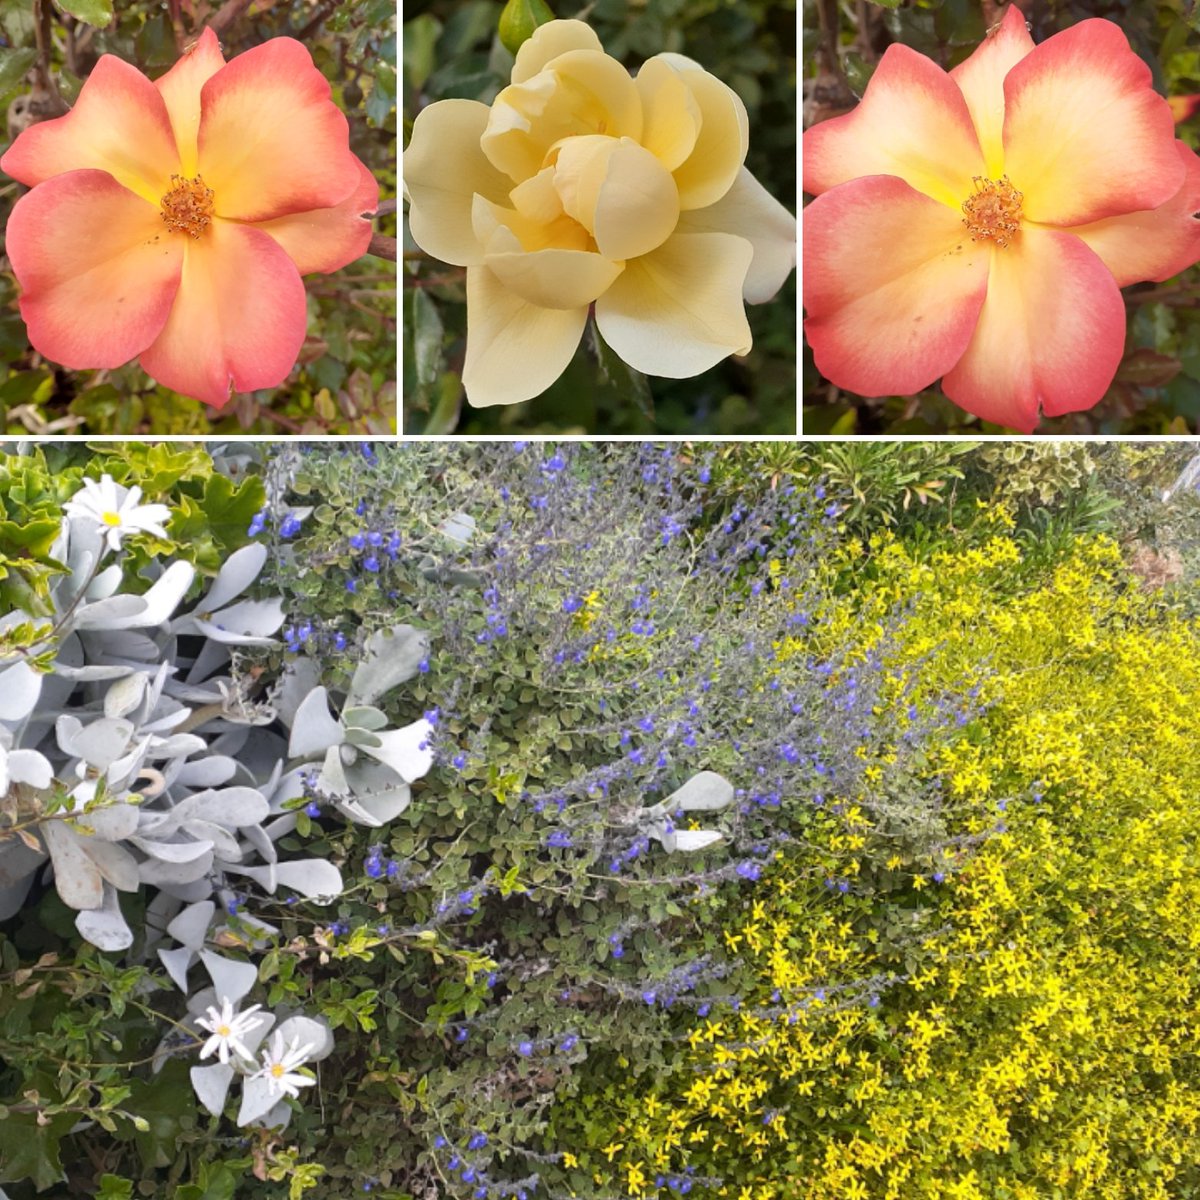 In my garden today. Playboy and Heidesommer roses and the lovely combination of Cotyledon, Salvia Marine Blue and Cineraria saxifraga. 💛🌼 #Sundayyellow #GardeningX #Flowers #FlowersOfTwitter #flowersmakeeverythingbetter #writerslife #aroseaday